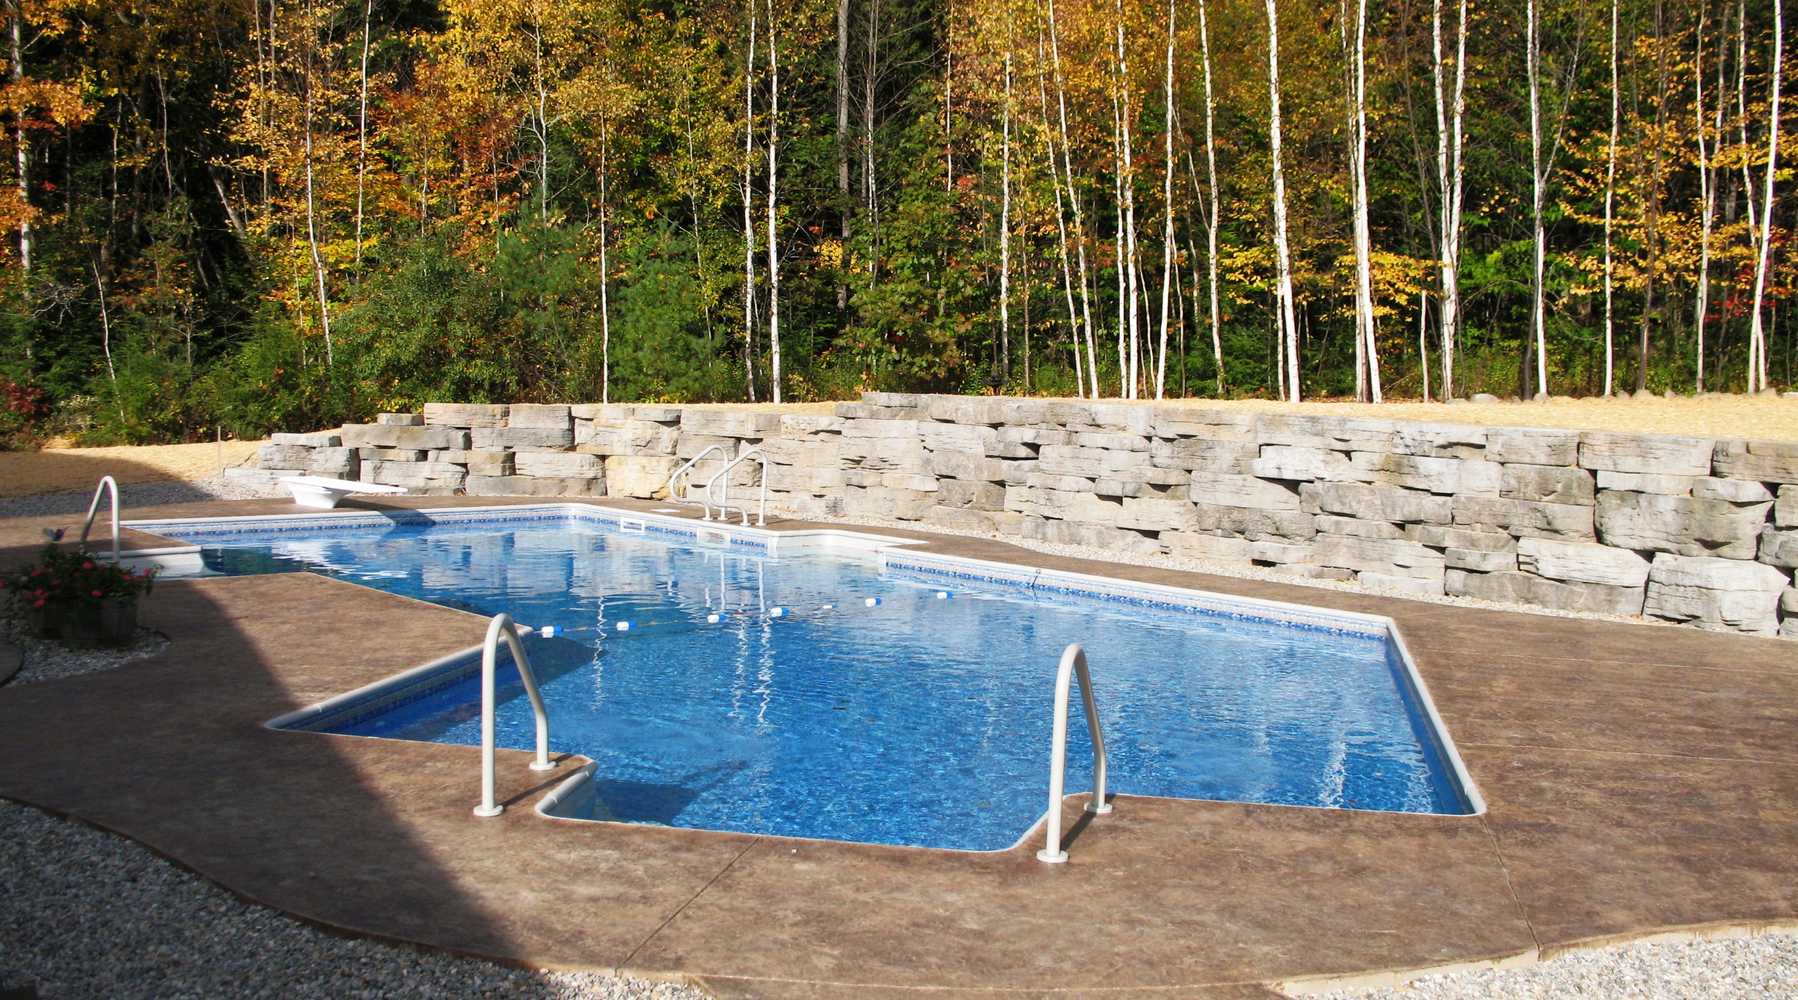 Project photos from All Seasons Pool & Spa